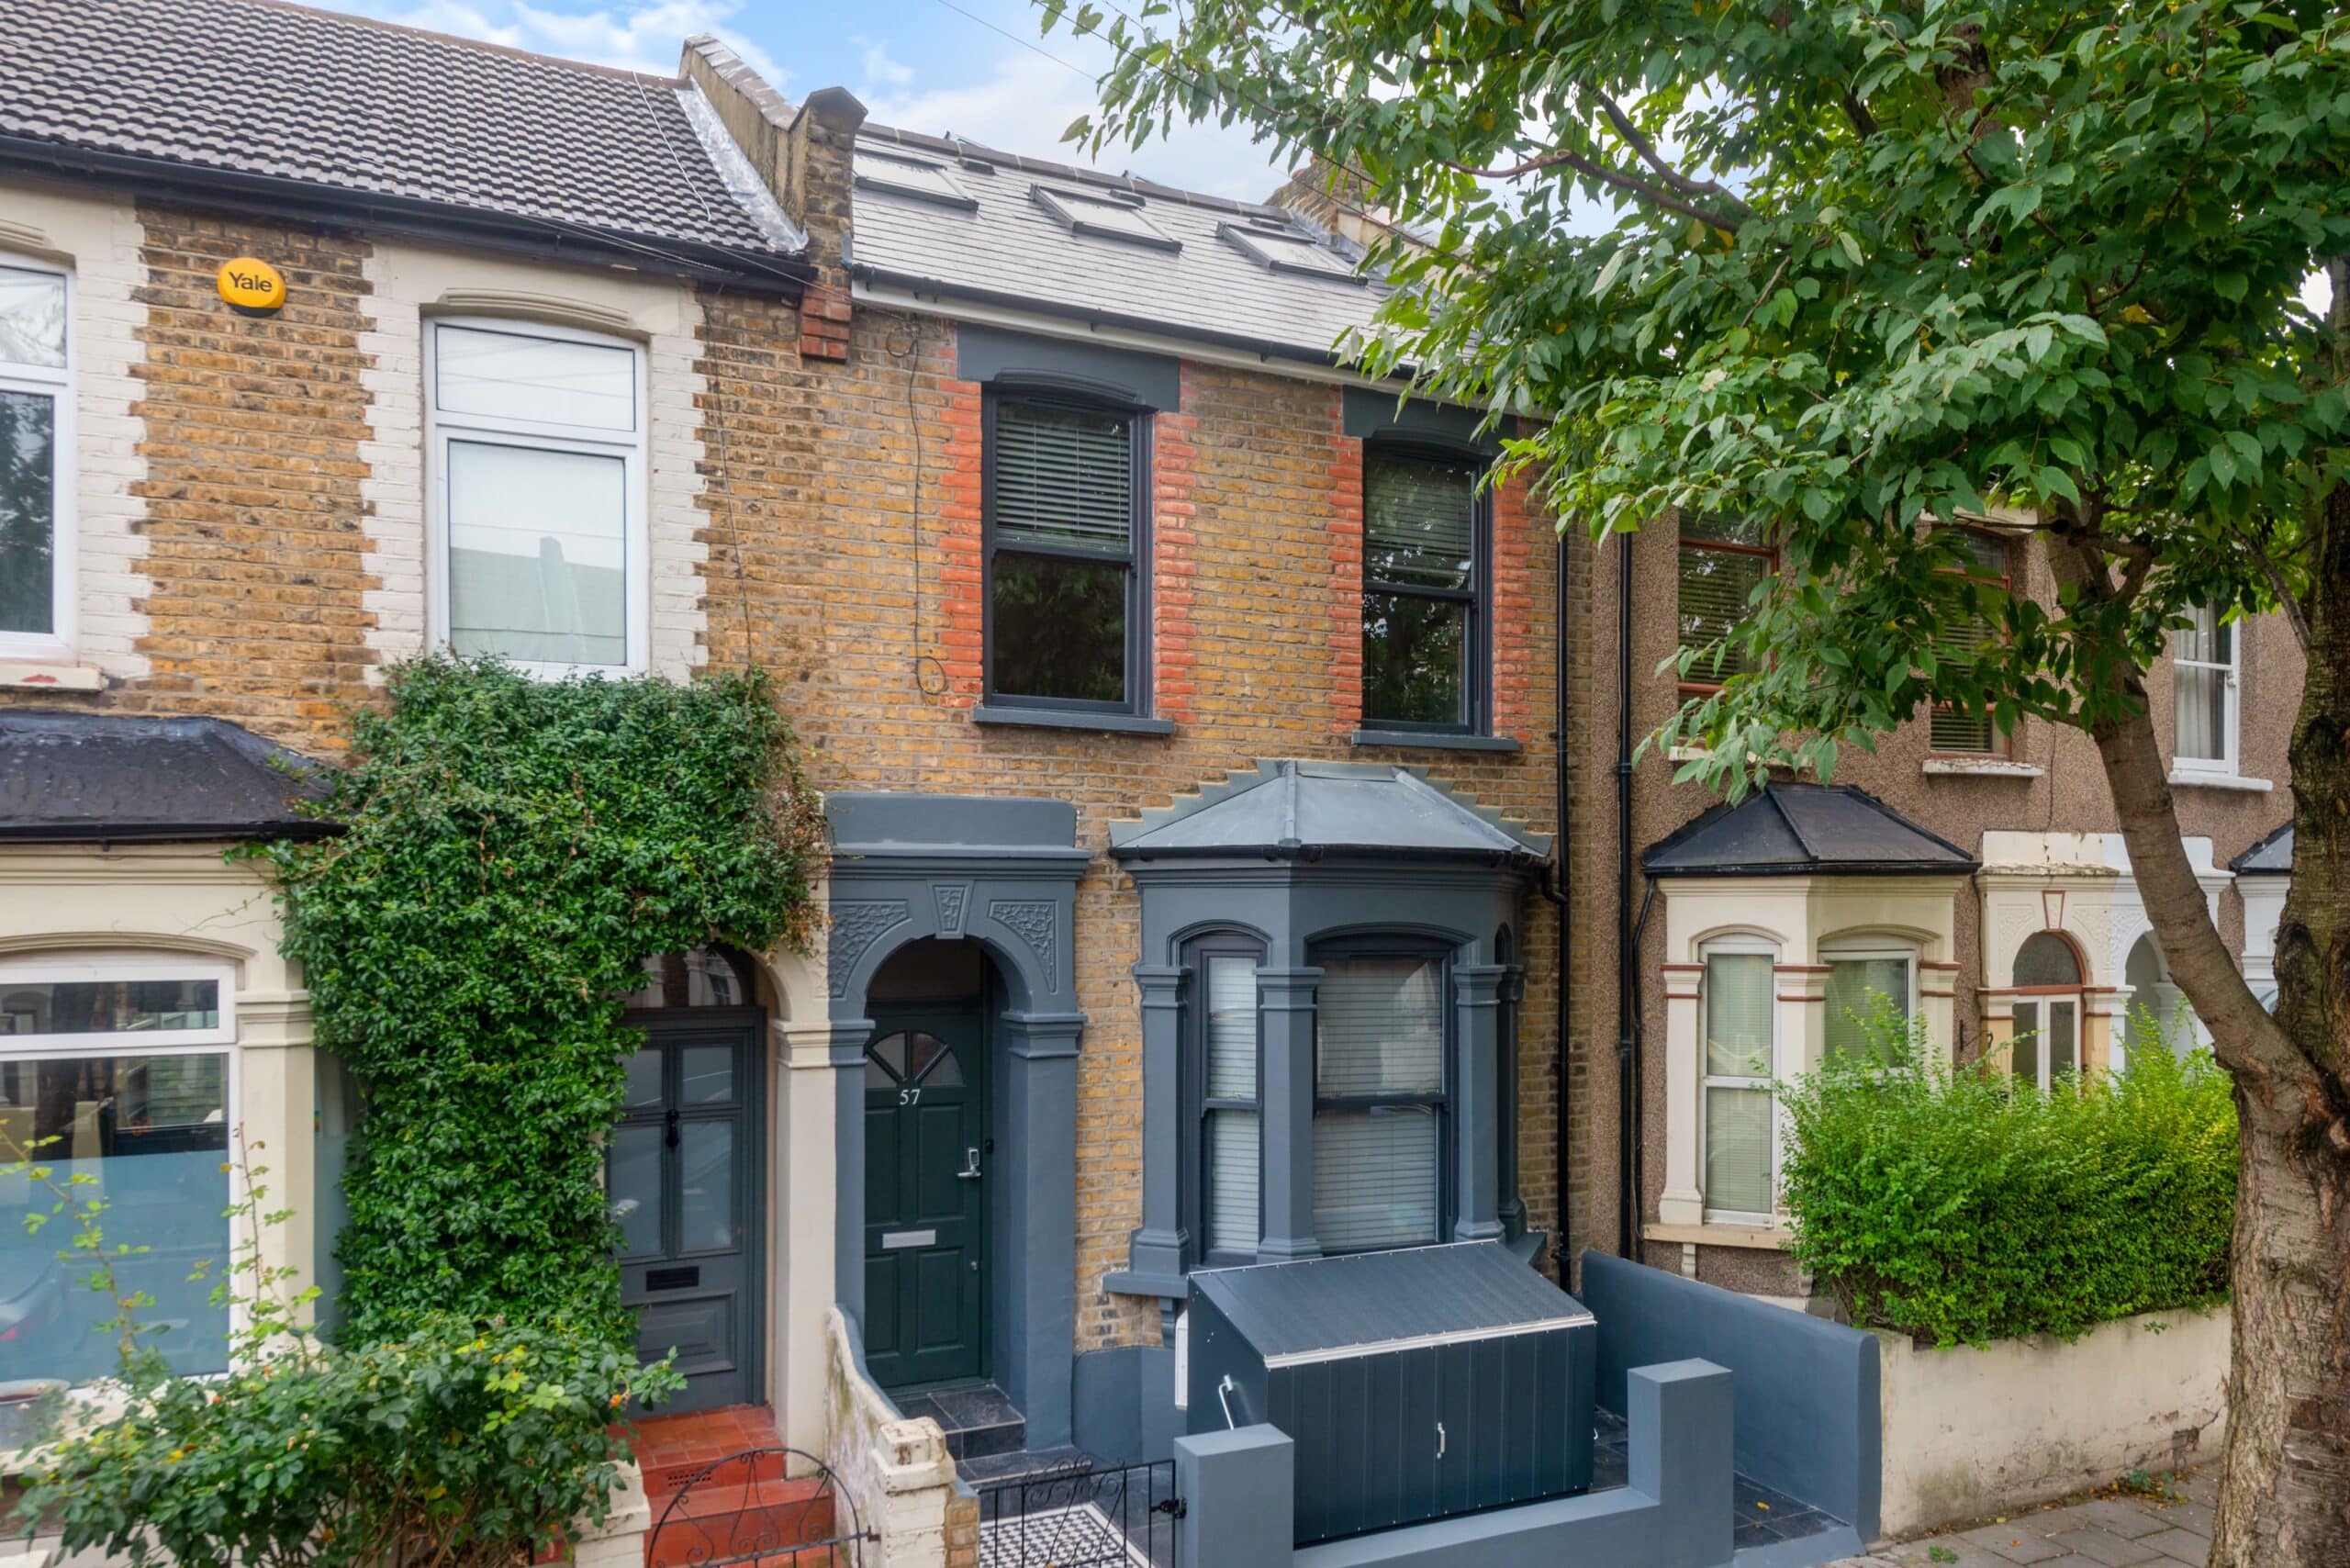 Hackney, London terraced house conversion to HMO